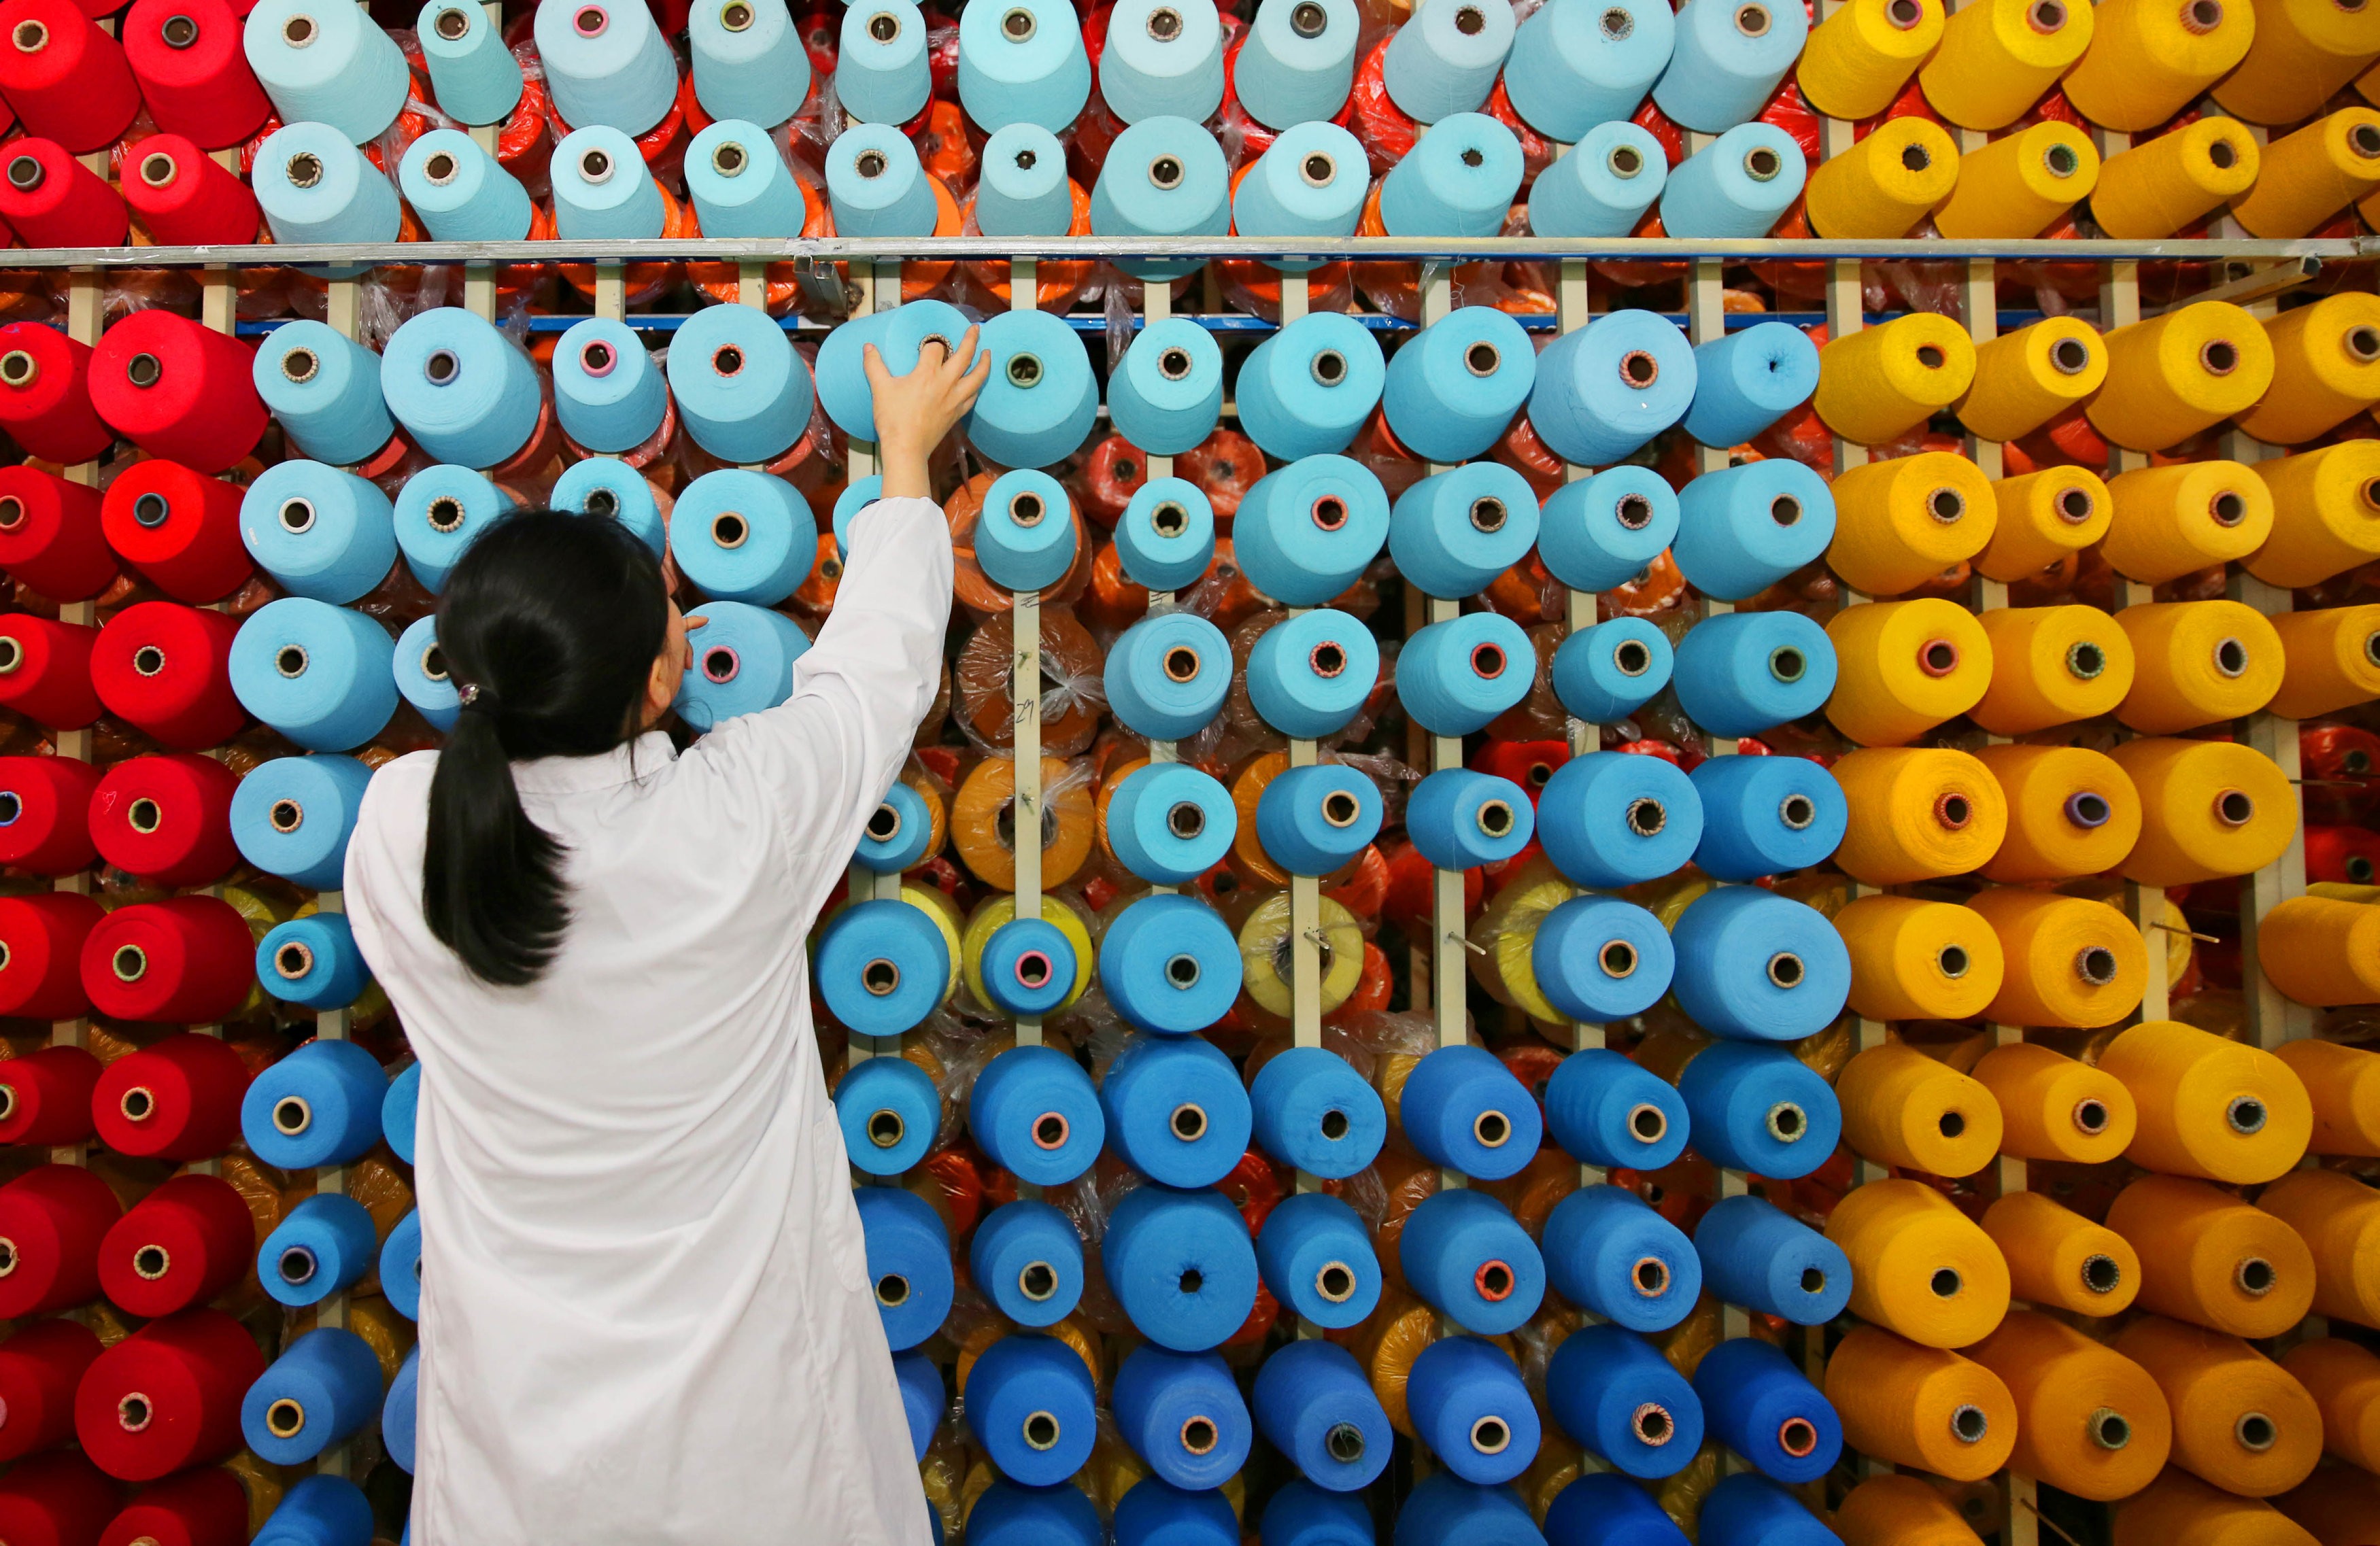 An employee arranges bobbins at a textile plant in Haian county in Jiangsu province on November 28, 2017. Photo: Reuters